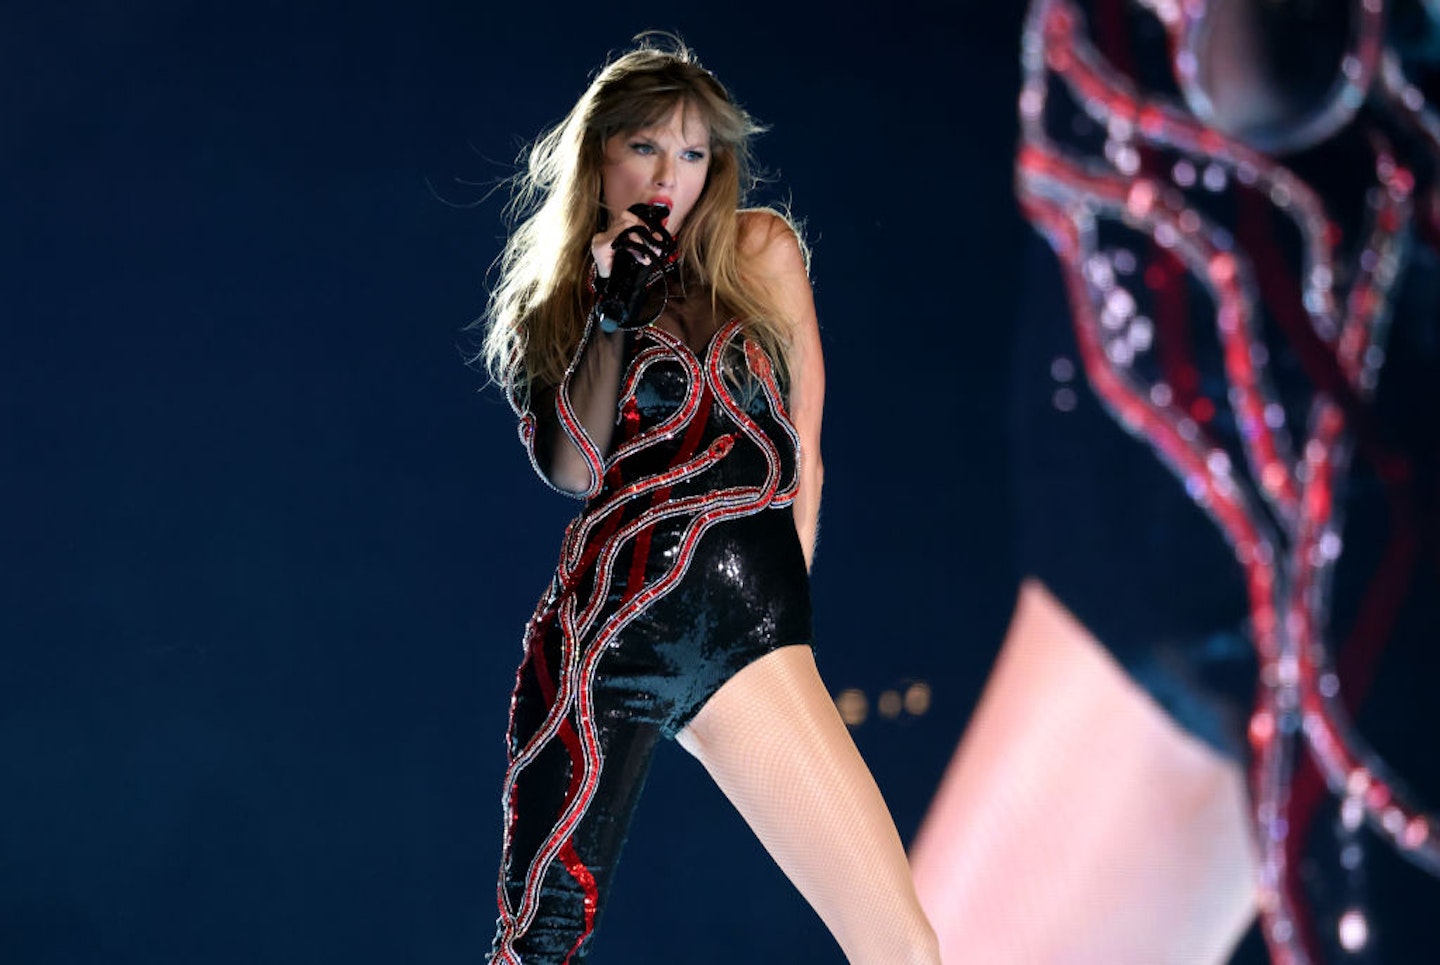 Taylor Swift Eras Tour Outfits: What To Wear